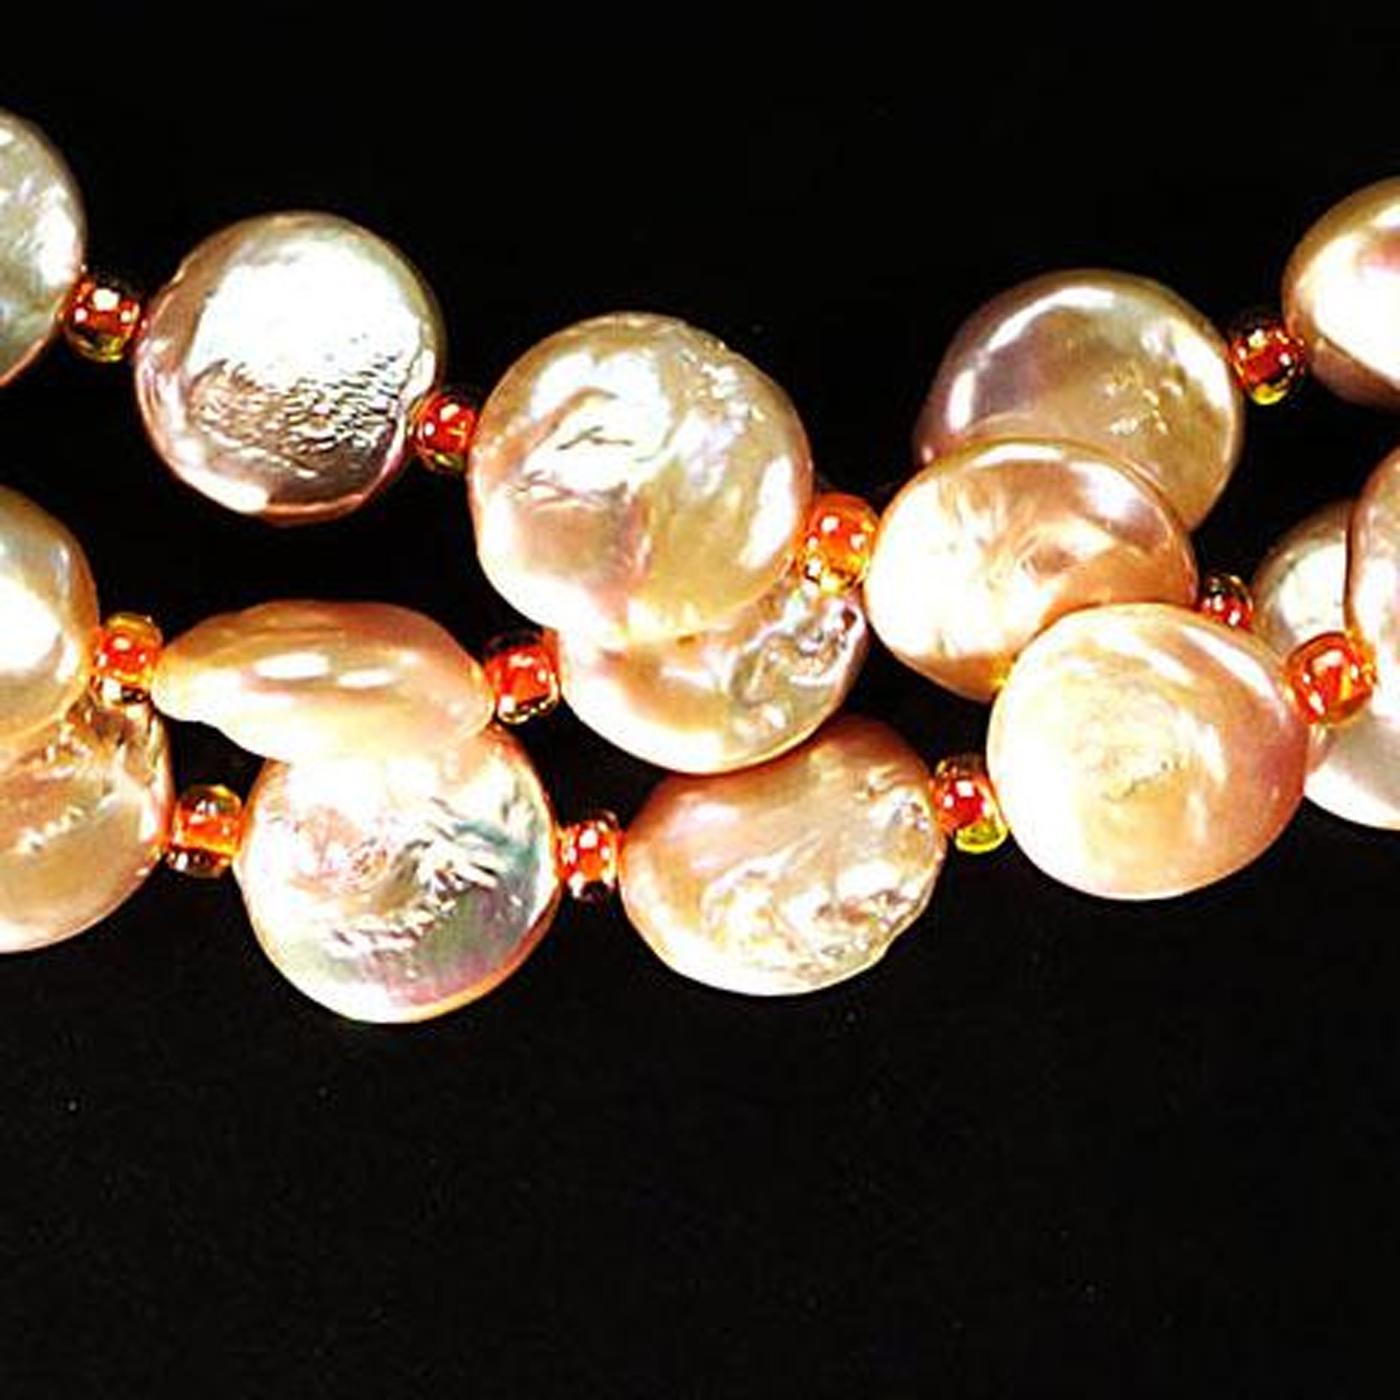 Bead AJD Triple Strand Coin Pearl Necklace in Peachy/Pink June Birthstone  Great Gift